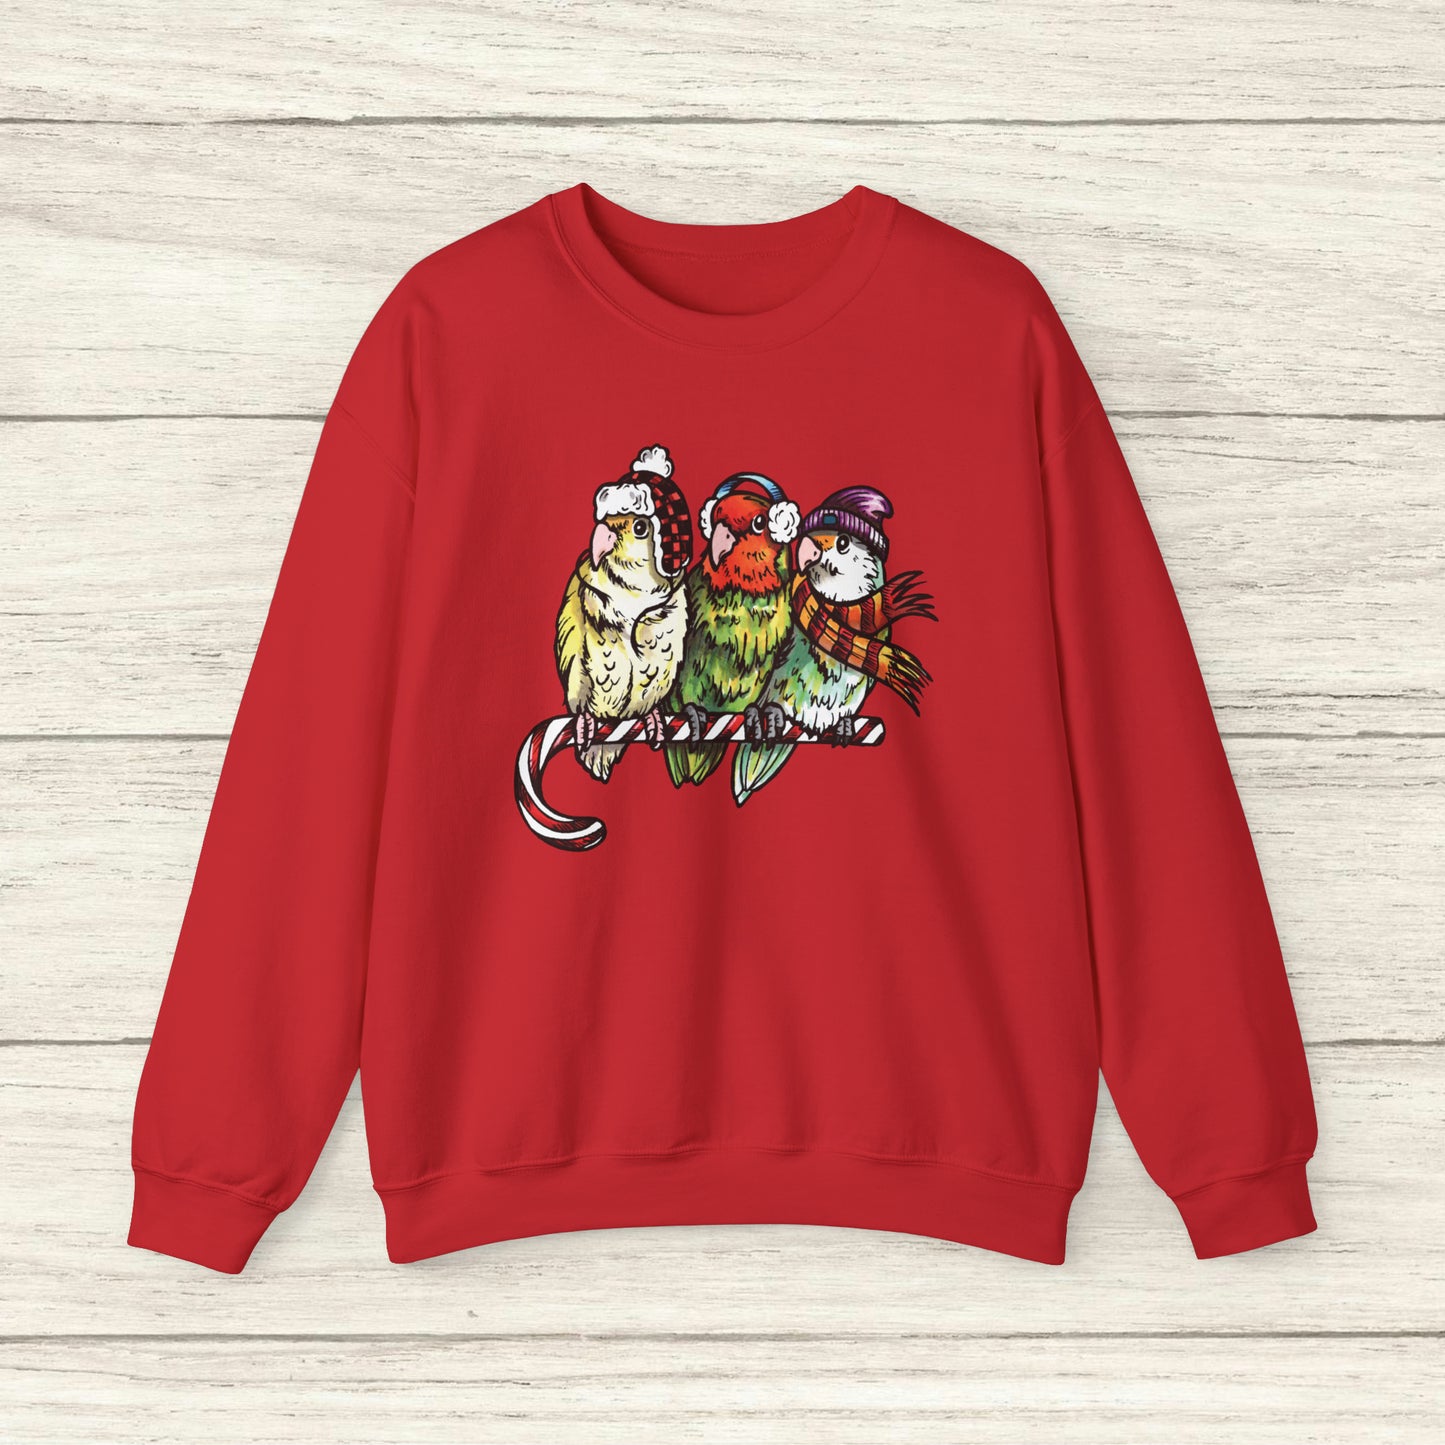 3 Lovebirds with Winter Wear & Perched on a Candy Cane, Crew Neck Sweatshirt